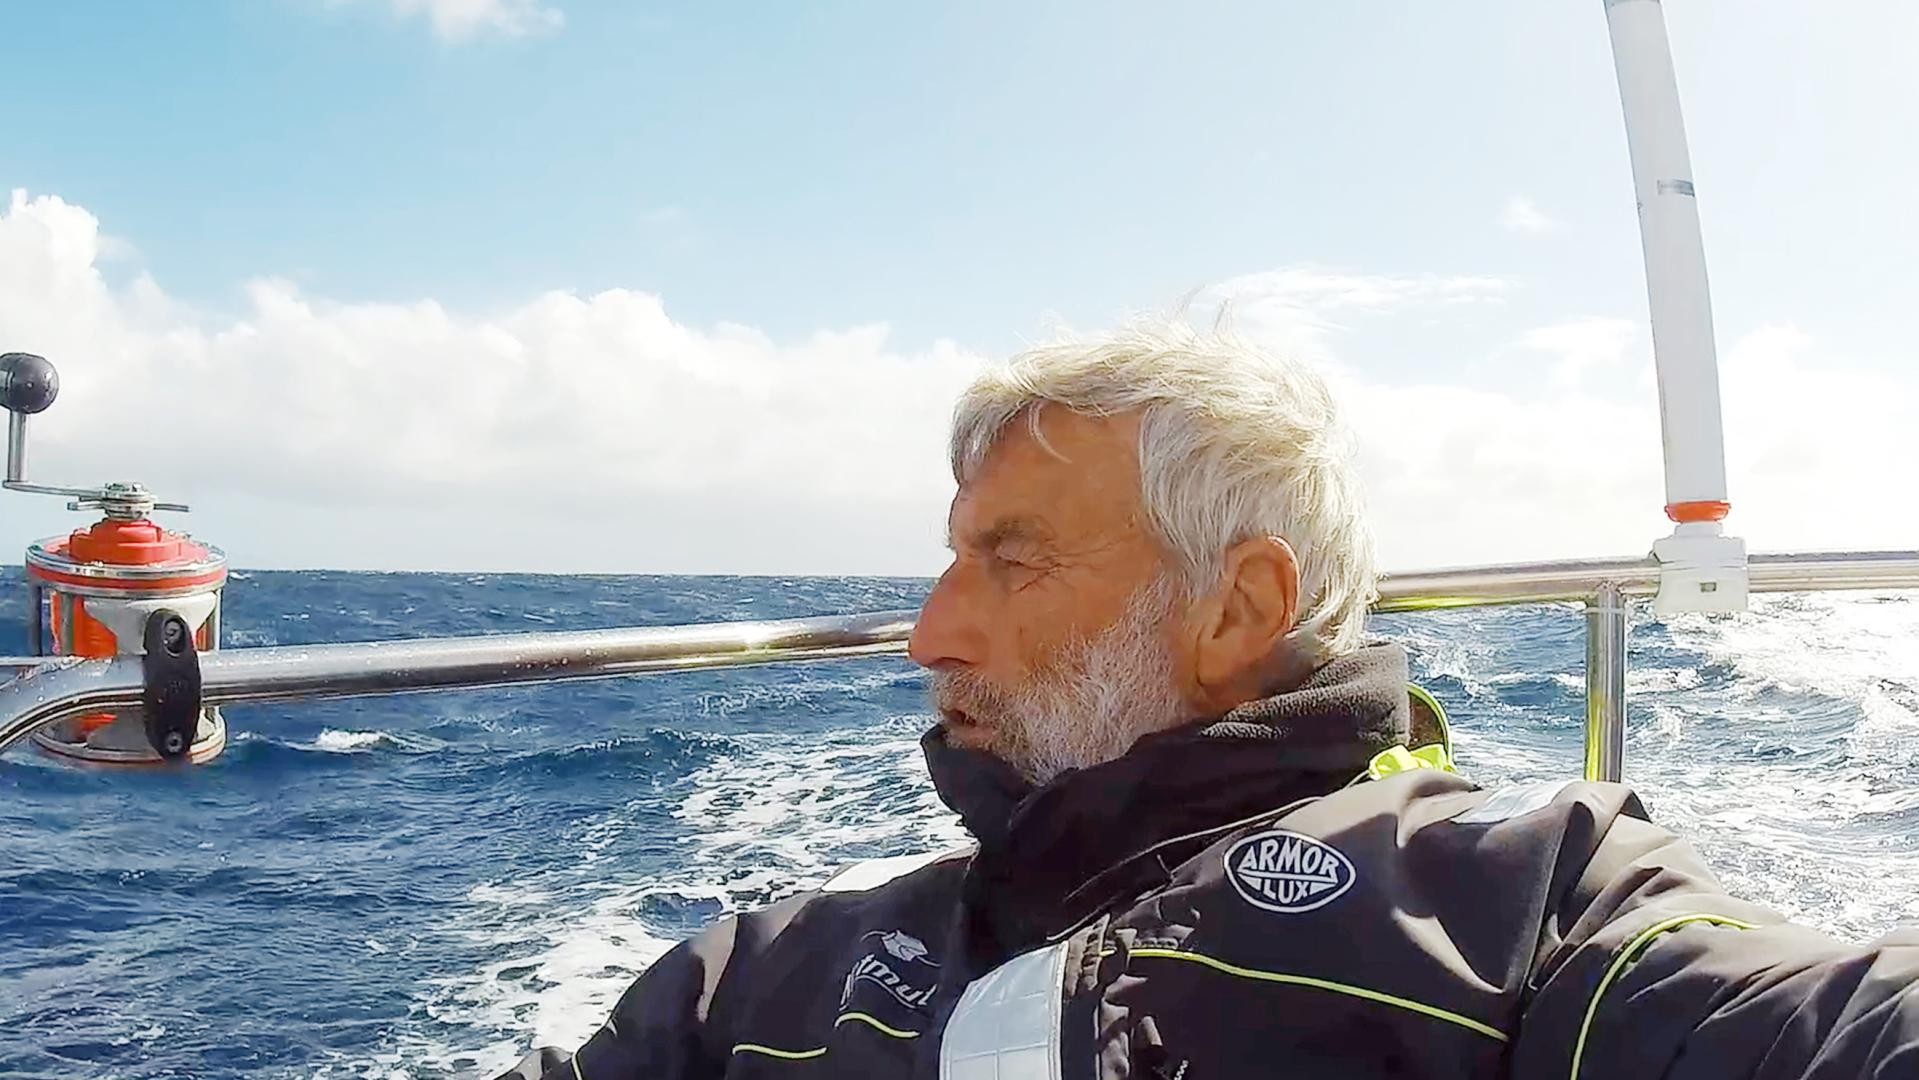 Jean-Luc Van Den Heede - working to protect a 1,343 mile lead over the remaining 6,800 miles back to Les Sables d'Olonne